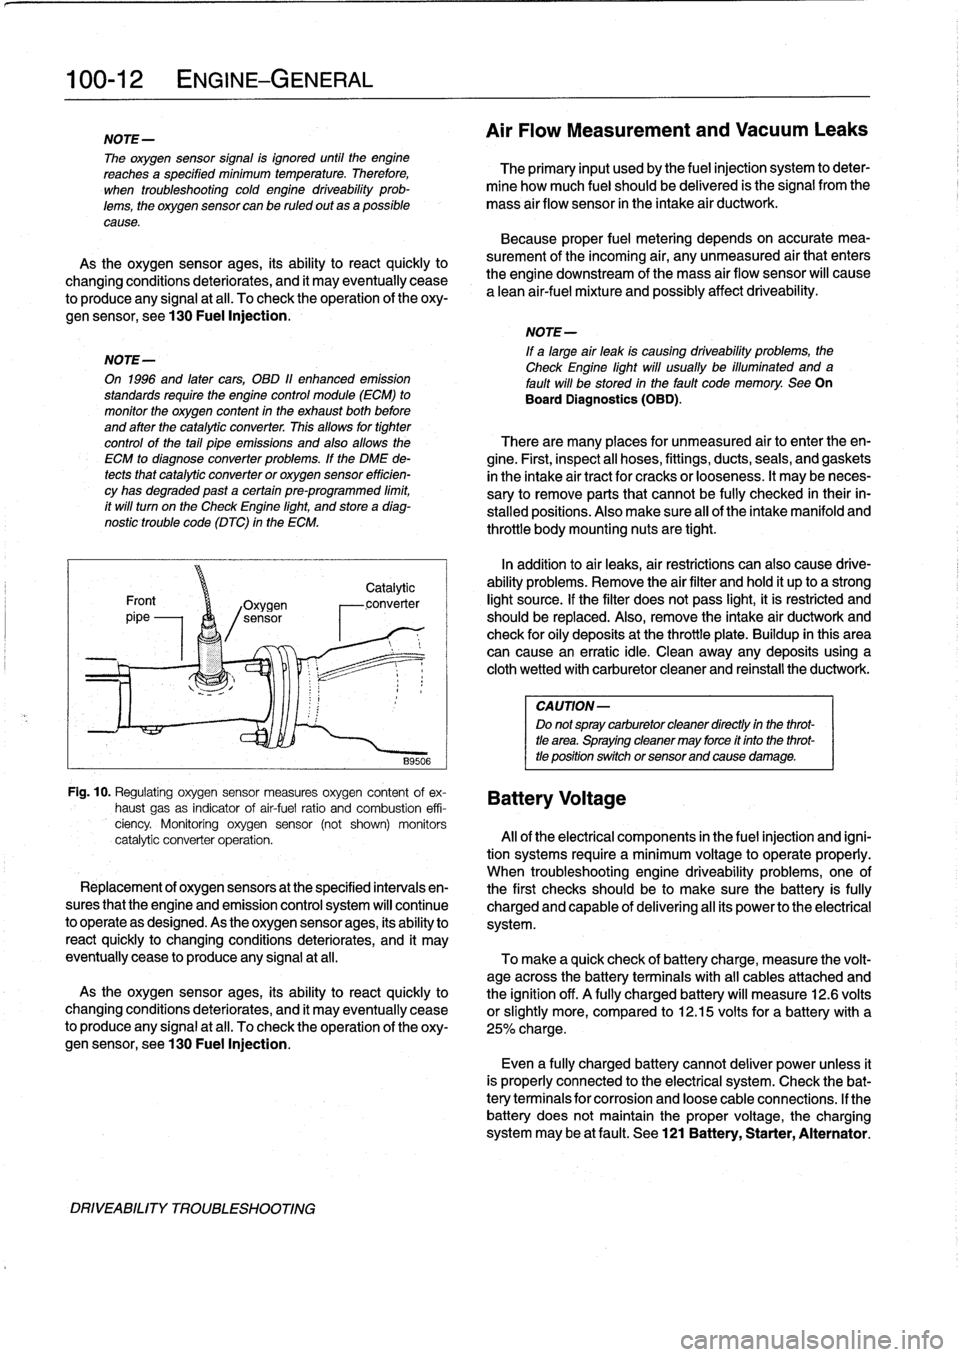 BMW 323i 1993 E36 Workshop Manual 
100-
1
2
ENGINE-GENERAL

NOTE-

The
oxygen
sensor
signal
is
ignored
until
the
engine
reachesa
specified
minimum
temperature
.
Therefore,

	

The
primary
input
usedby
the
fuel
injection
system
to
dete